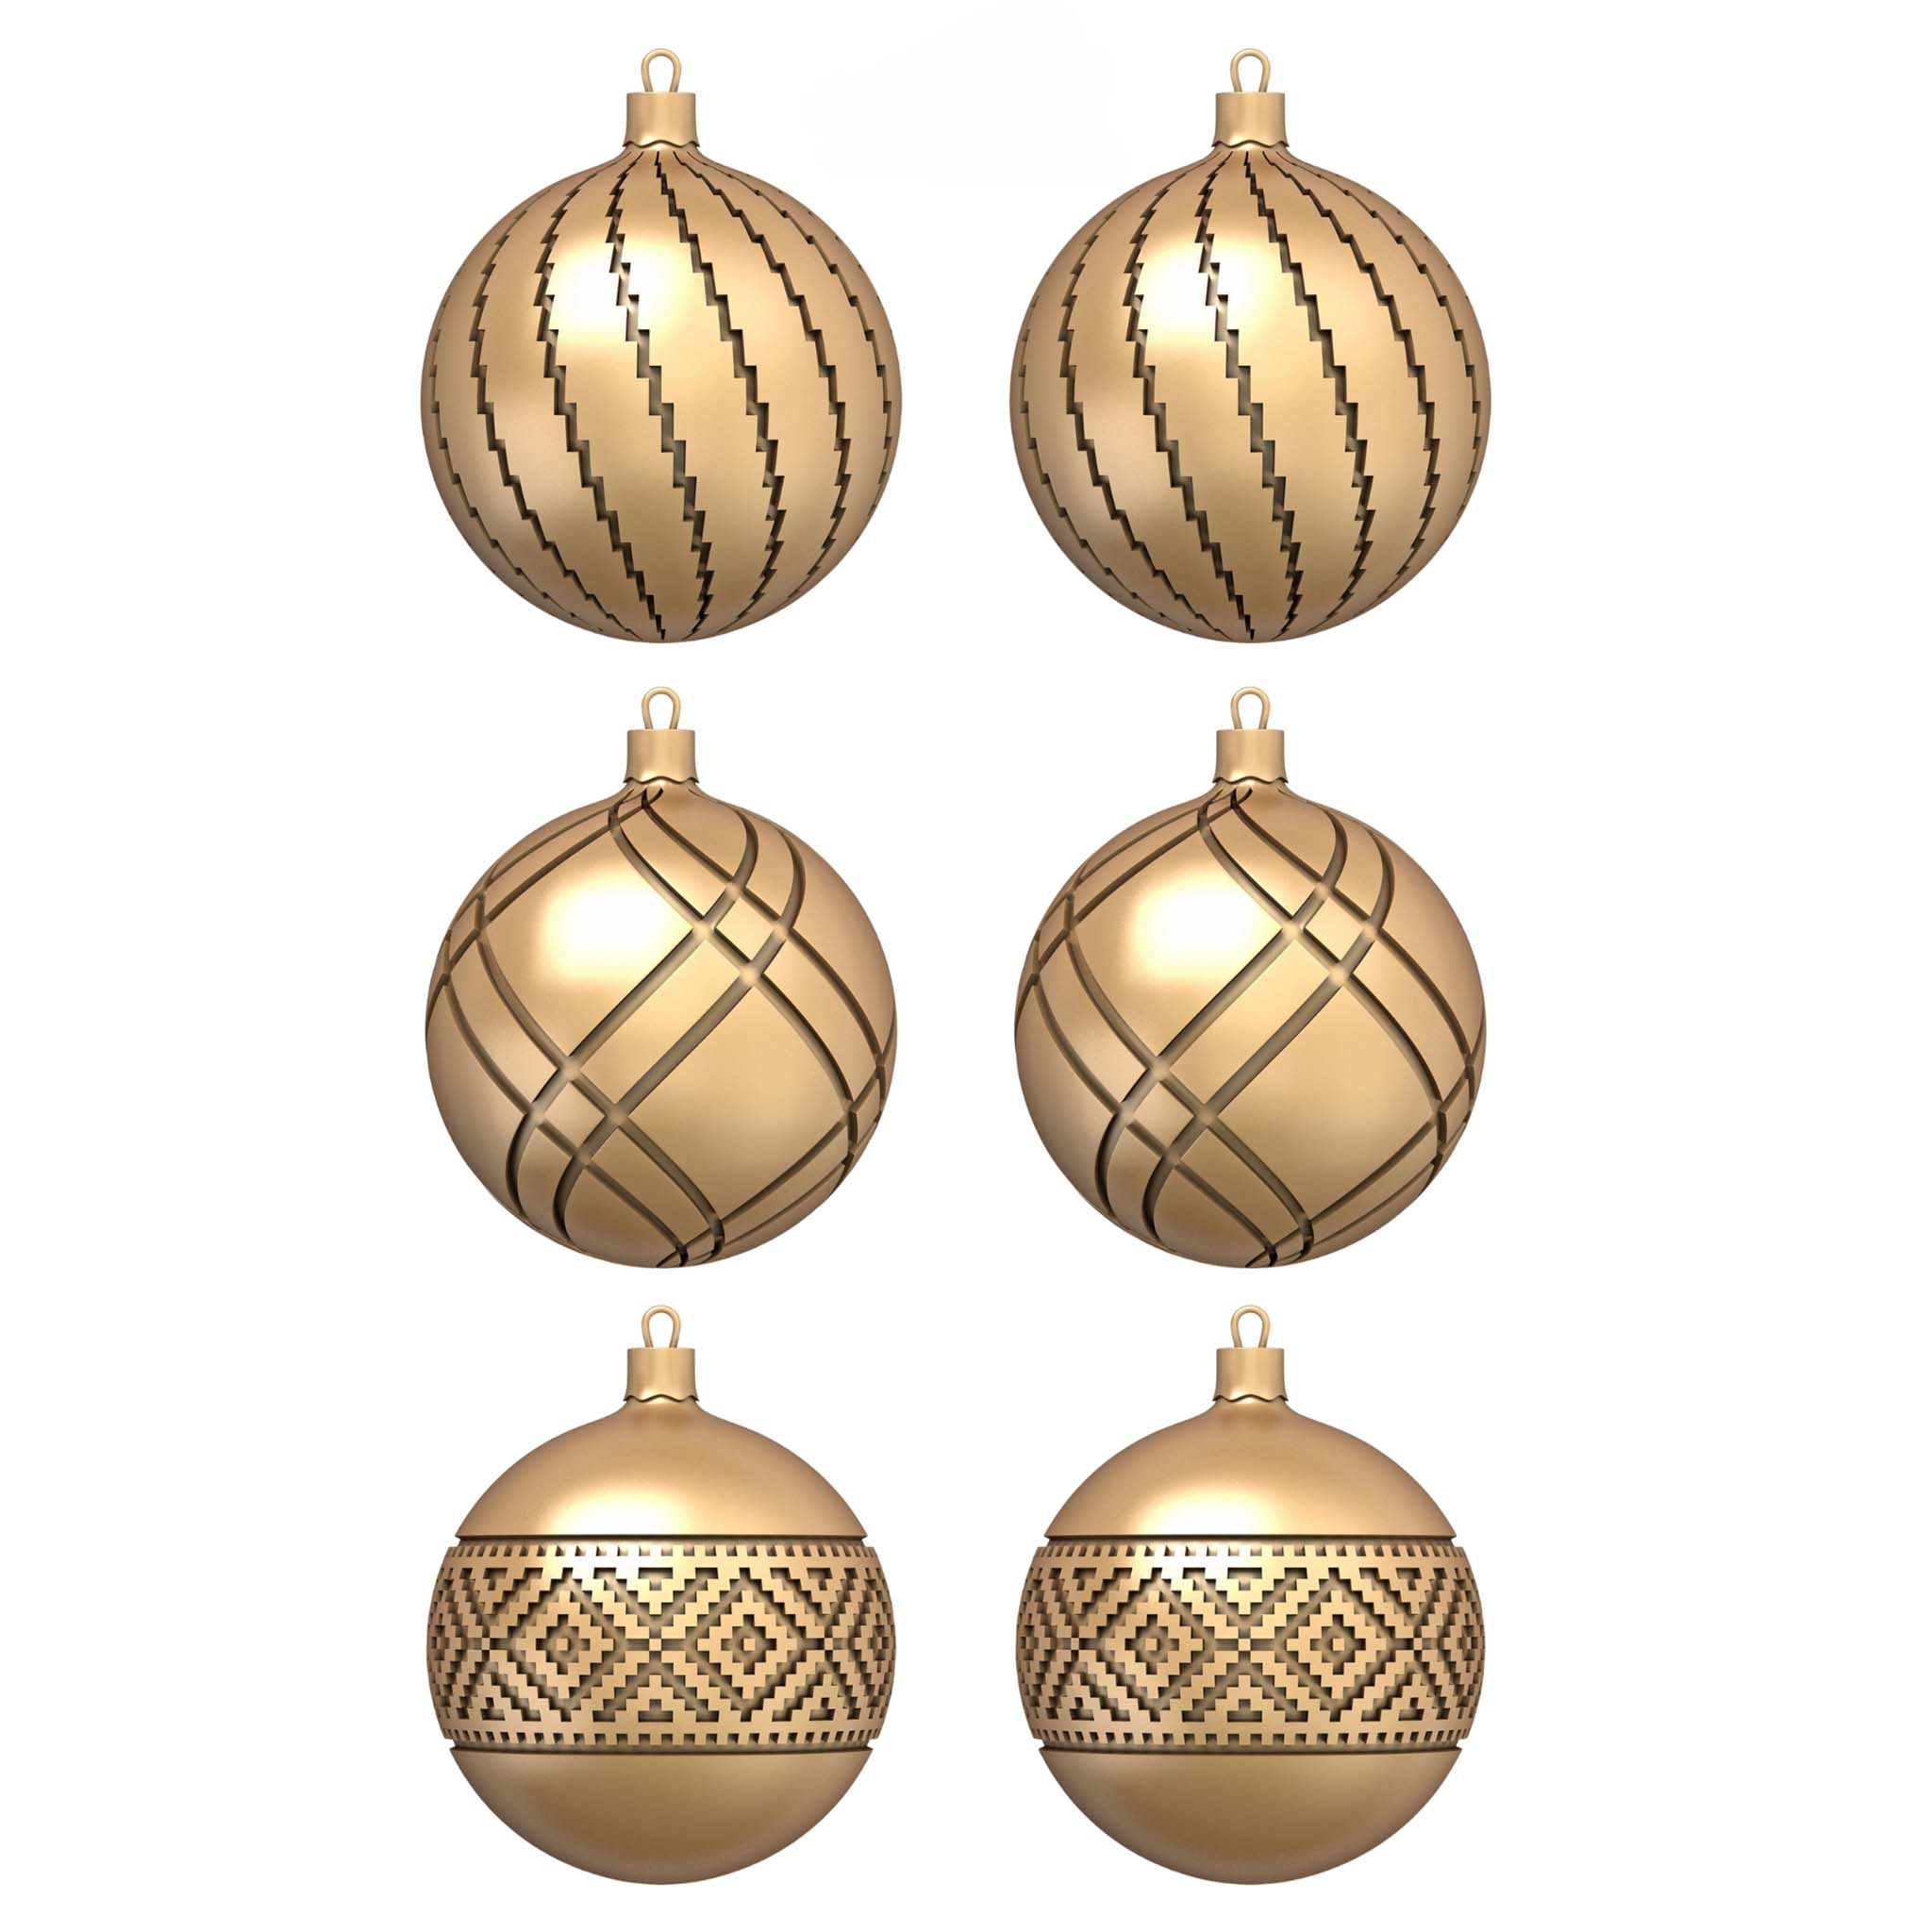 Gold colored silicone mould castings of 6 ornaments are against a white background. There are 2 each of 3 different designs.